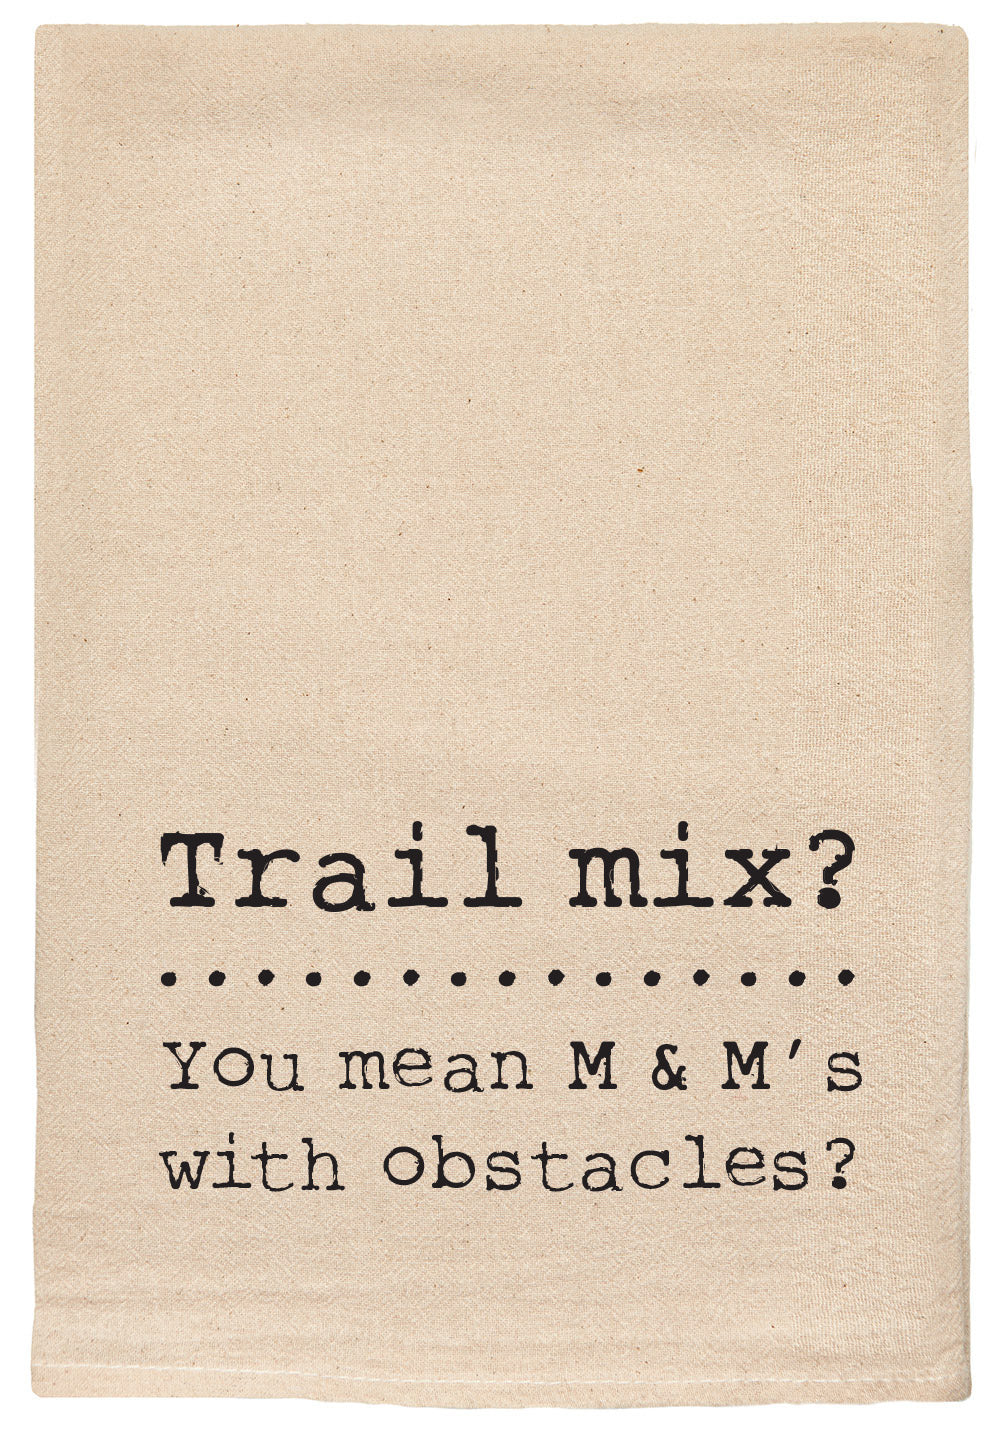 Trail mix? You mean M & M's with obstacles?